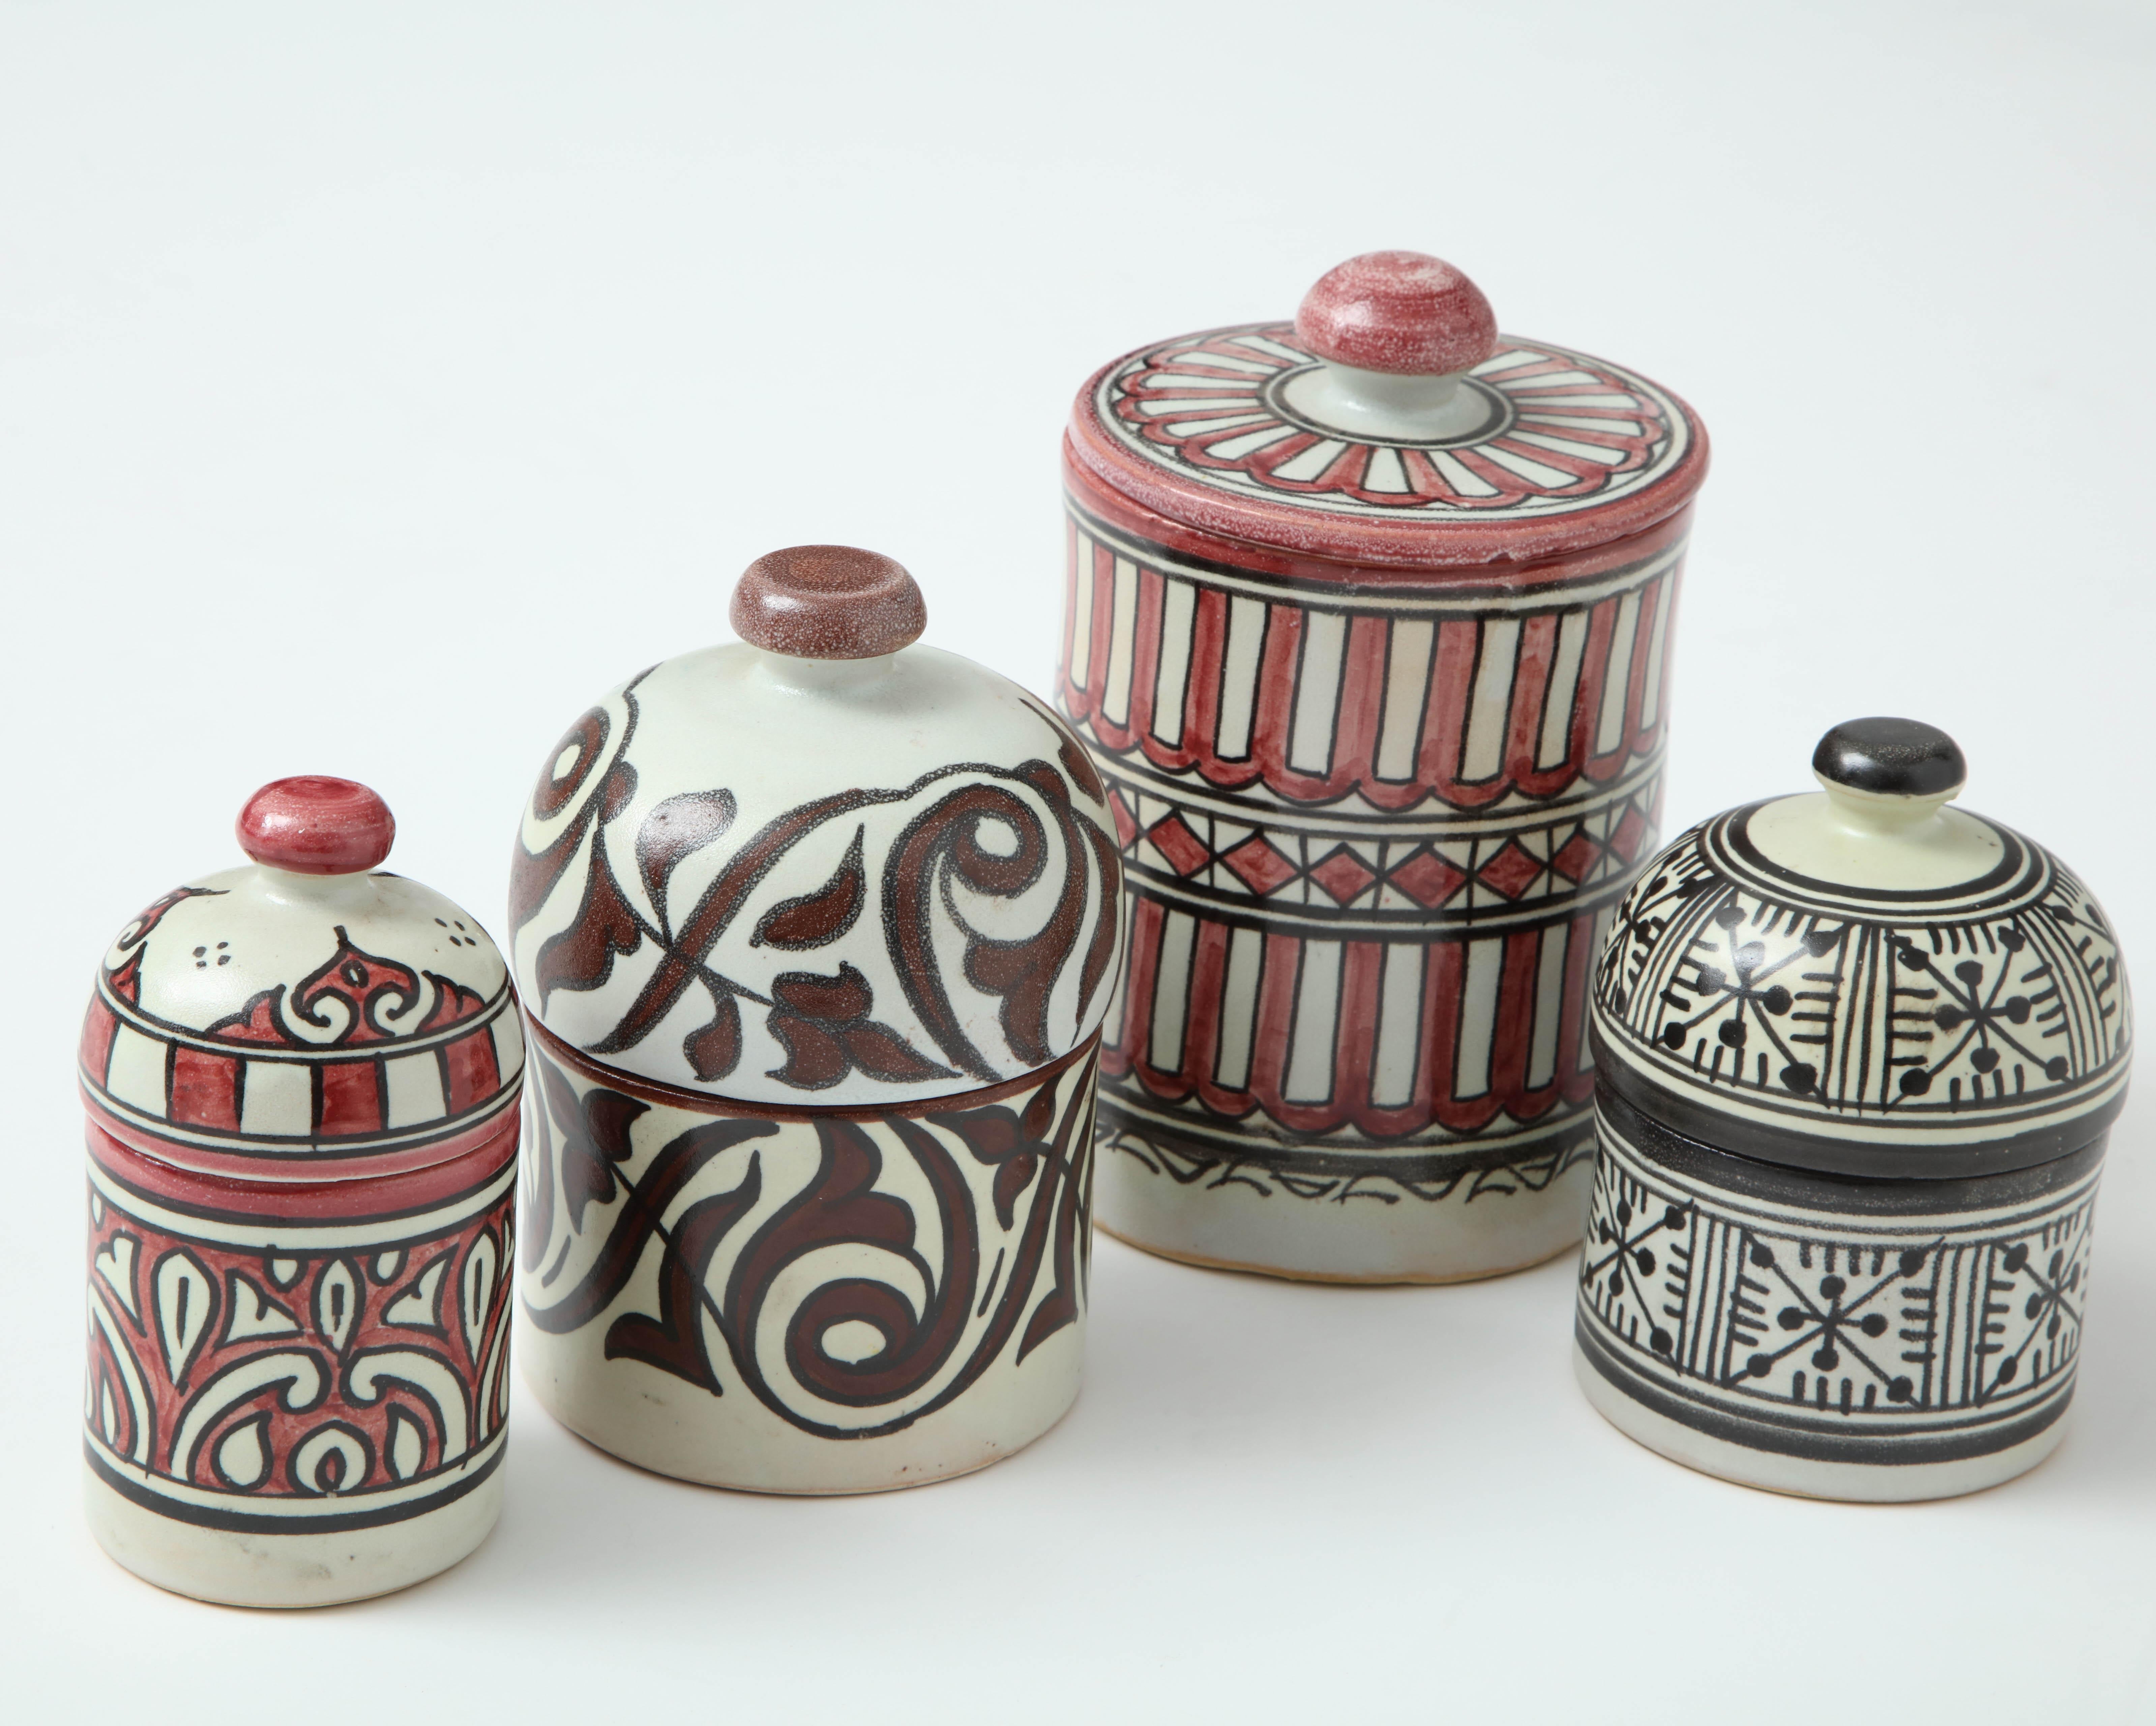 Ceramic Pottery from Morocco